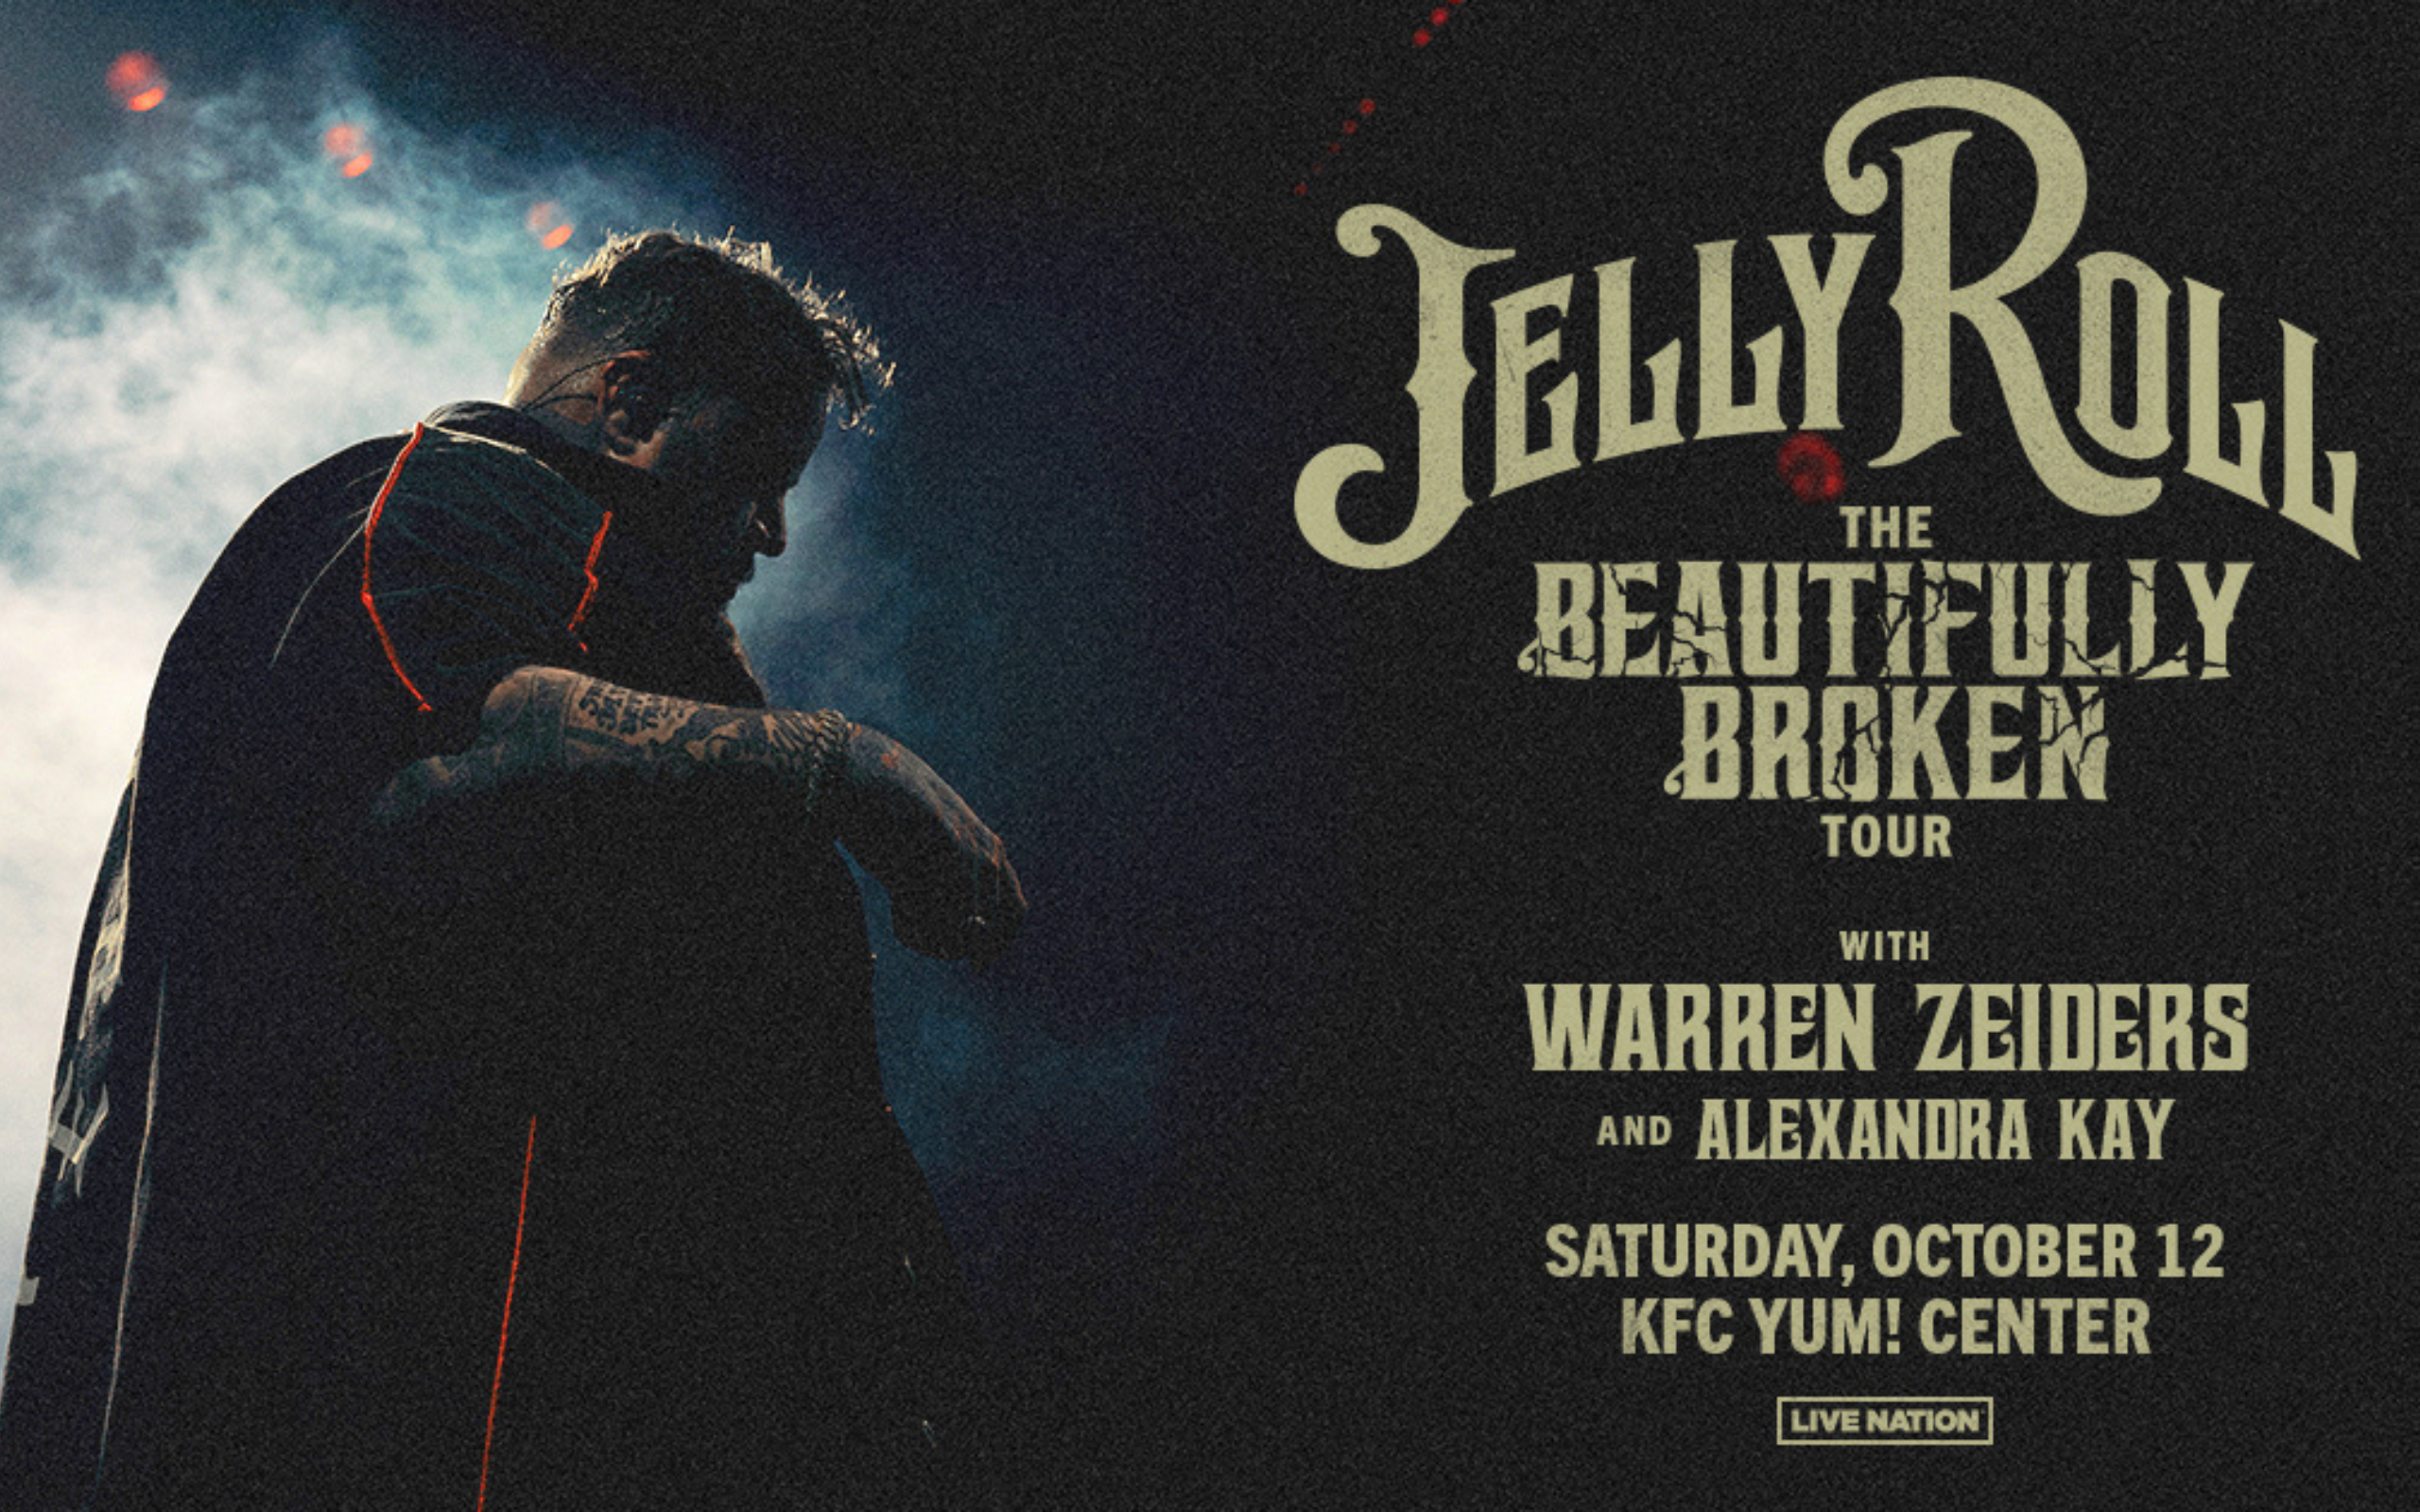 <h1 class="tribe-events-single-event-title">Jelly Roll @ KFC Yum! Center</h1>